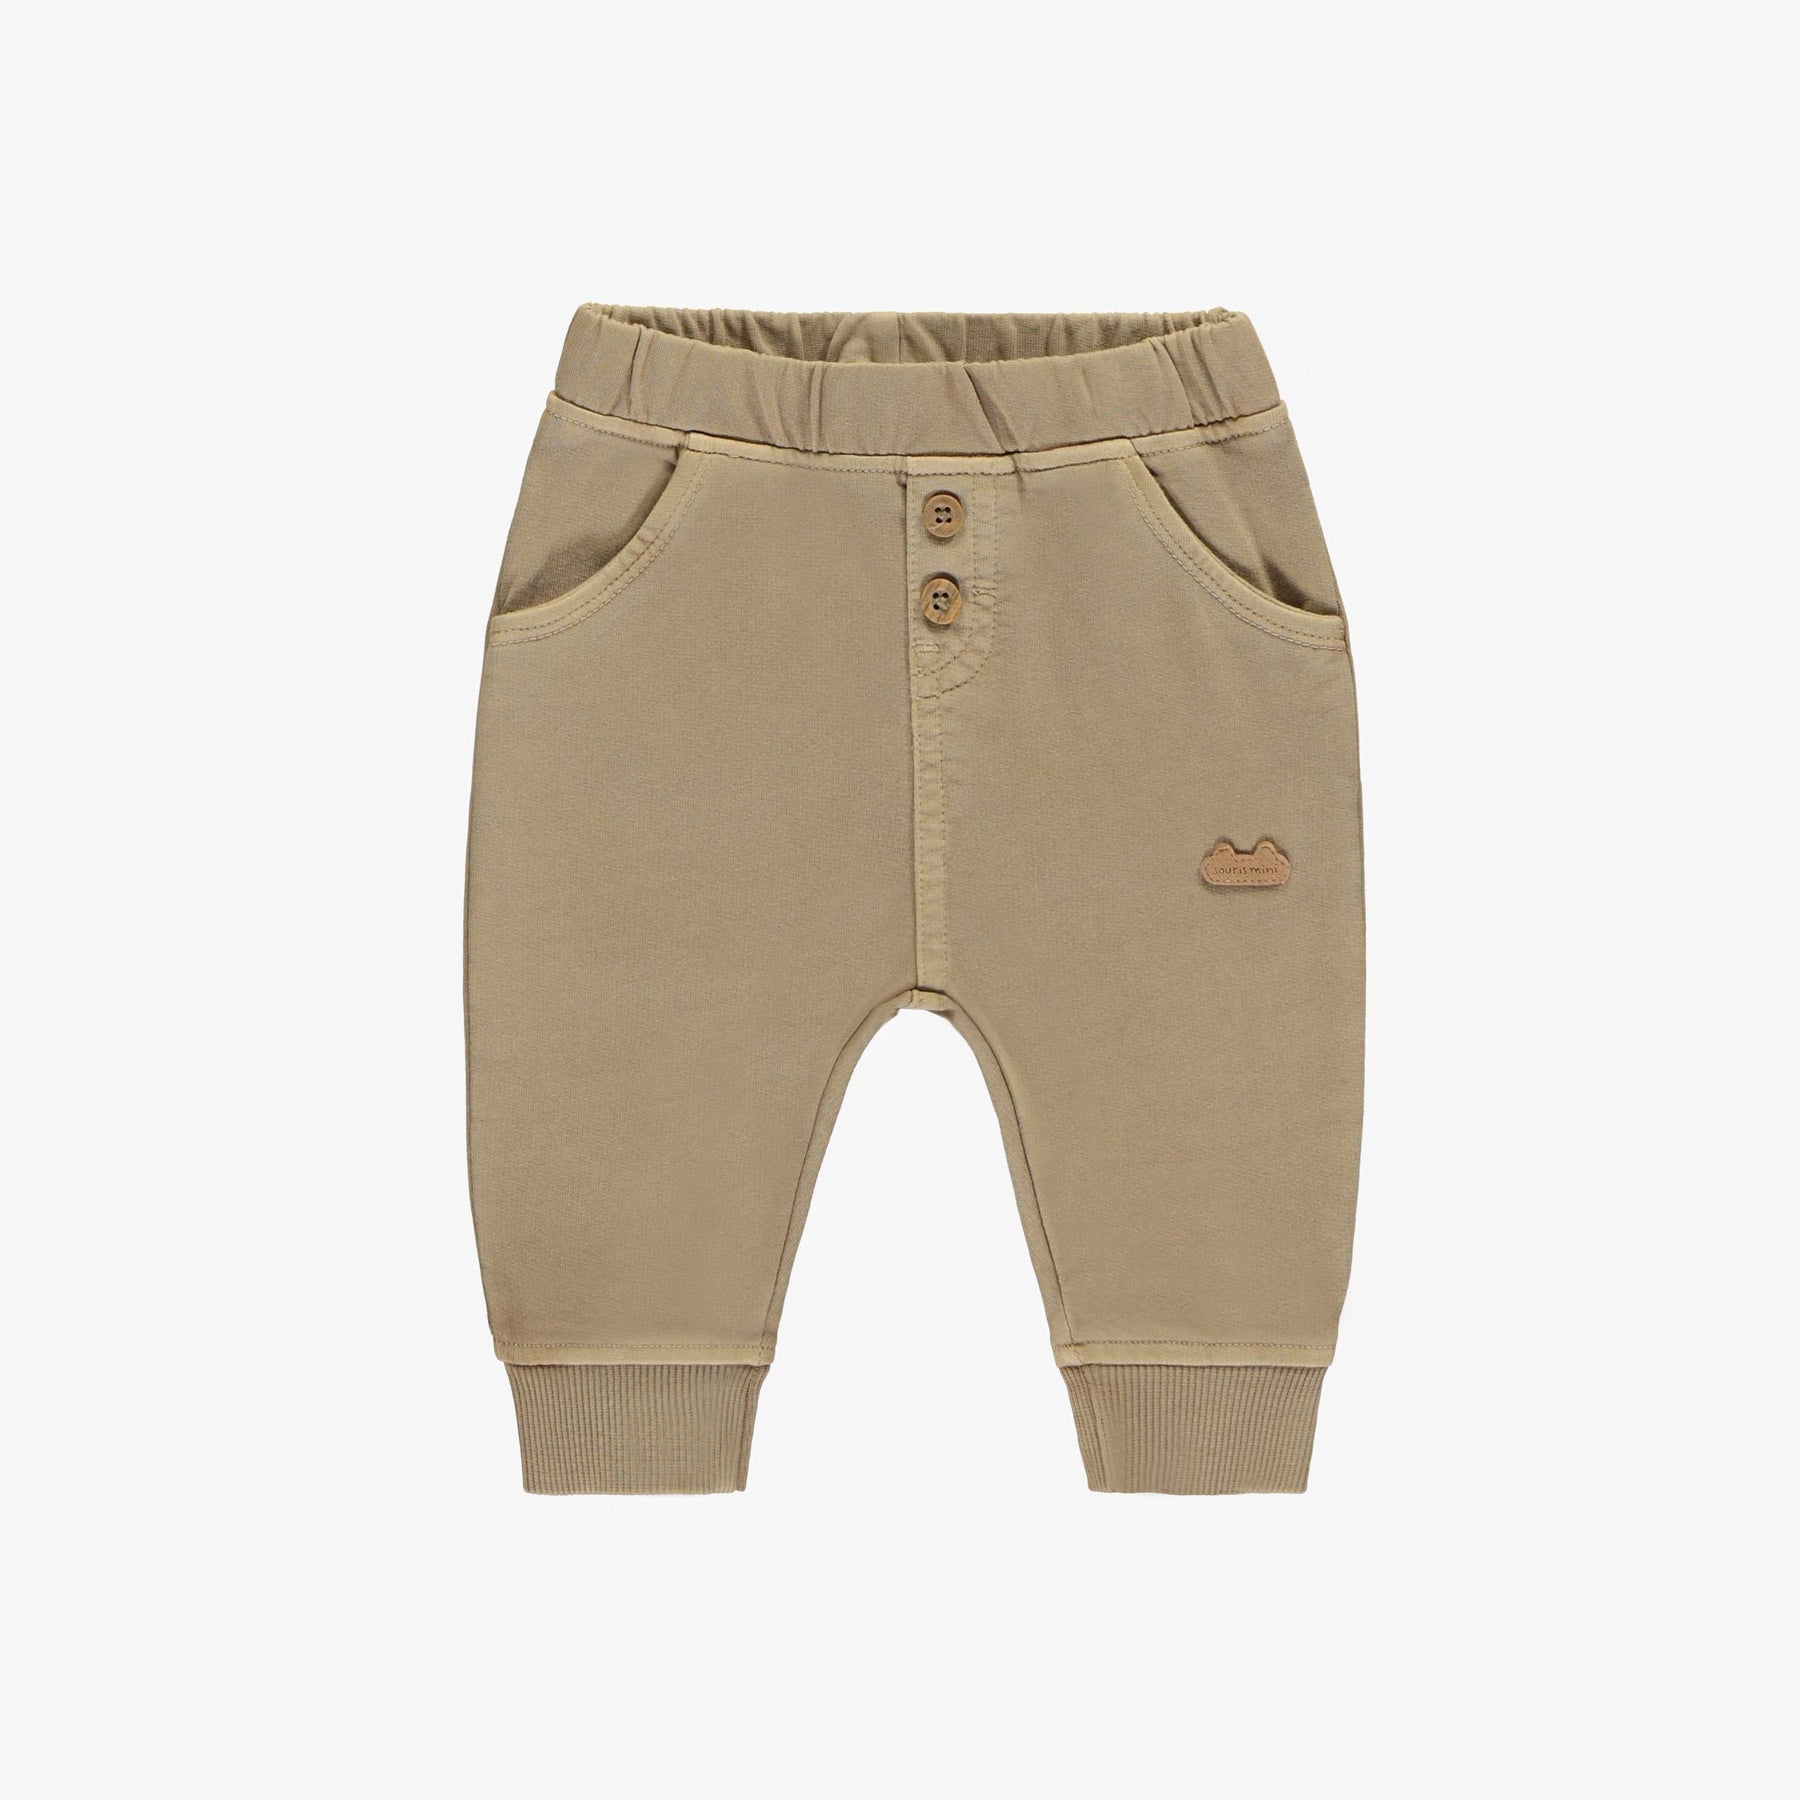 LIGHT BROWN PANTS REGULAR FIT JOGGER STYLE FRENCH TERRY, NEWBORN